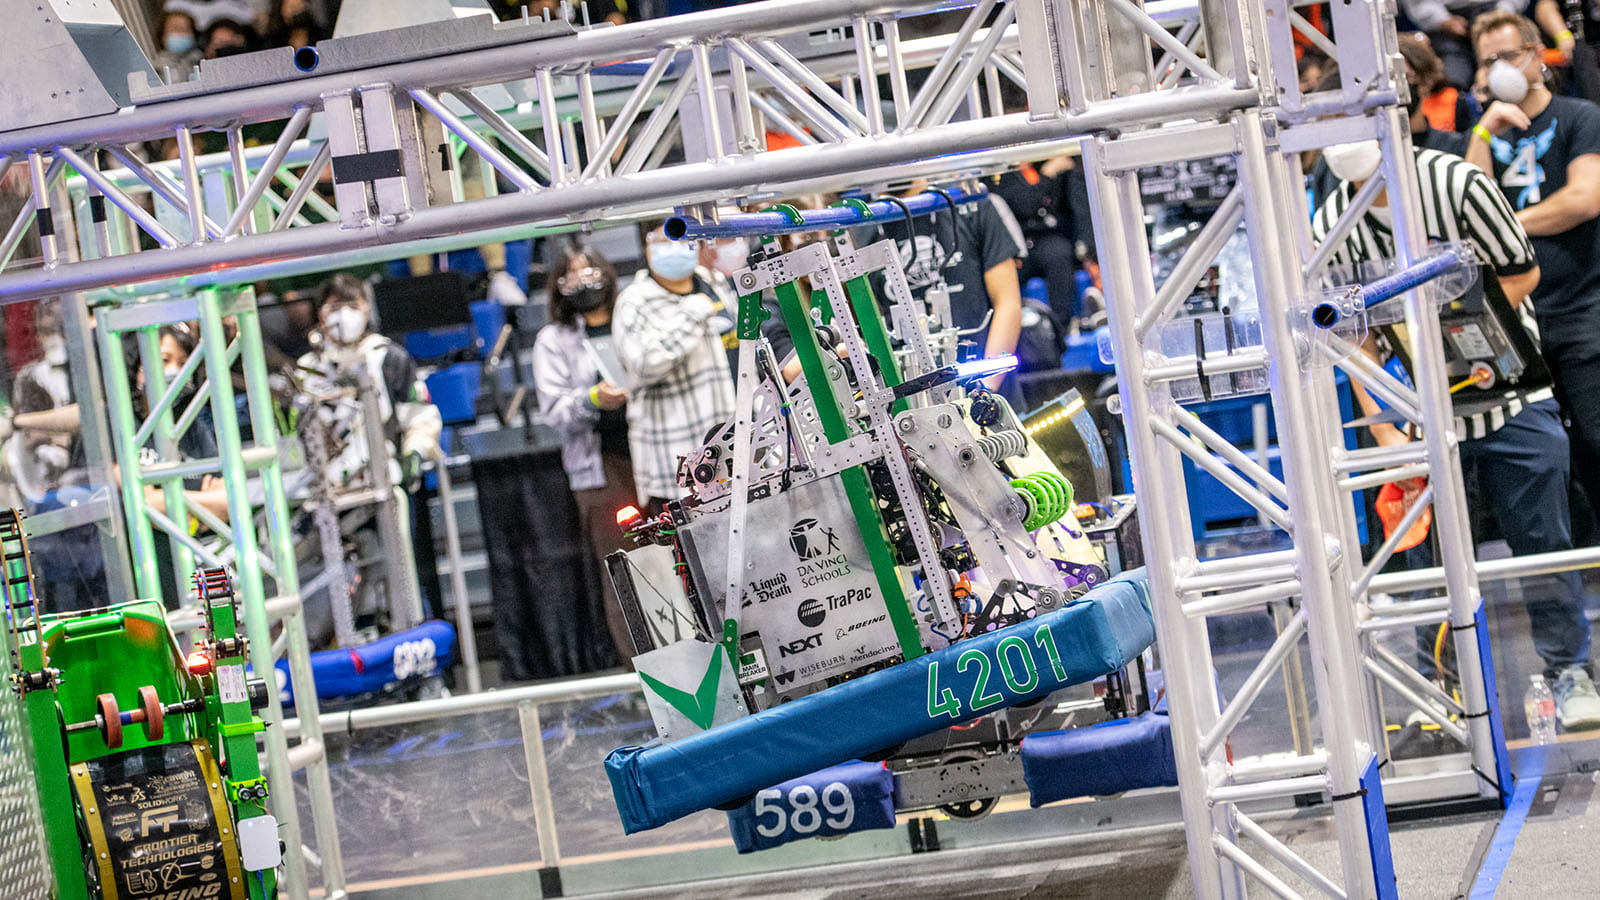 In their first qualification match of the FIRST Robotics 2022 Los Angeles Regional, The Vitruvian Bots show off the capabilities of their robot, named TakeOff, with one of the fastest high climbs at the event.